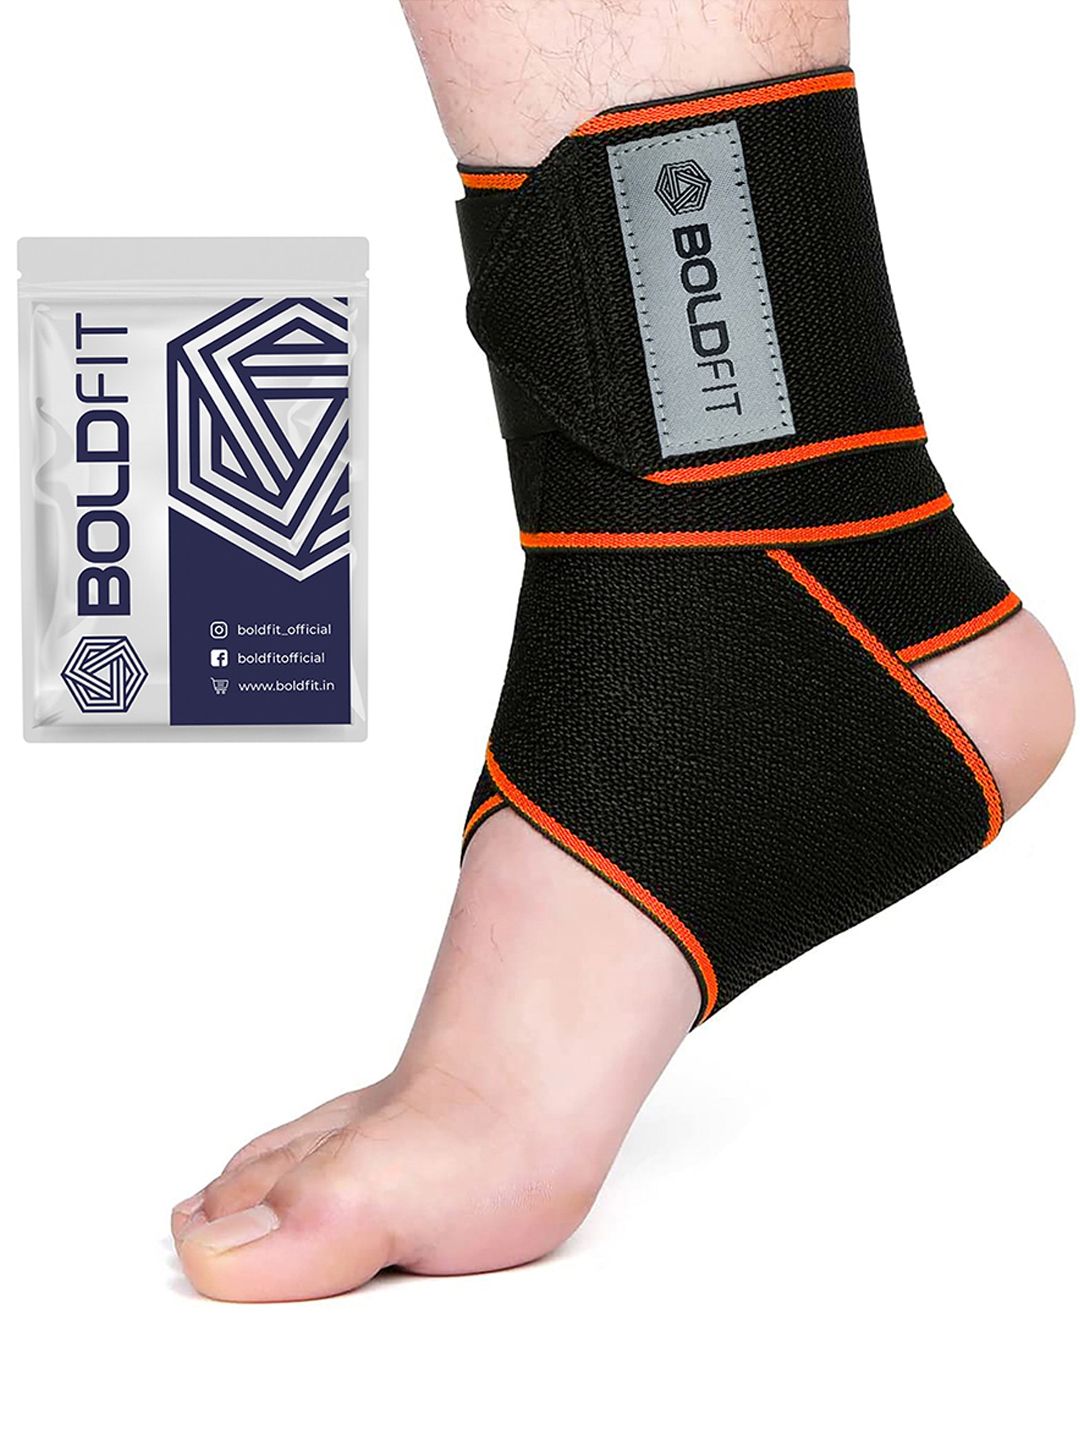 BOLDFIT Black Ankle Support Wrap Price in India